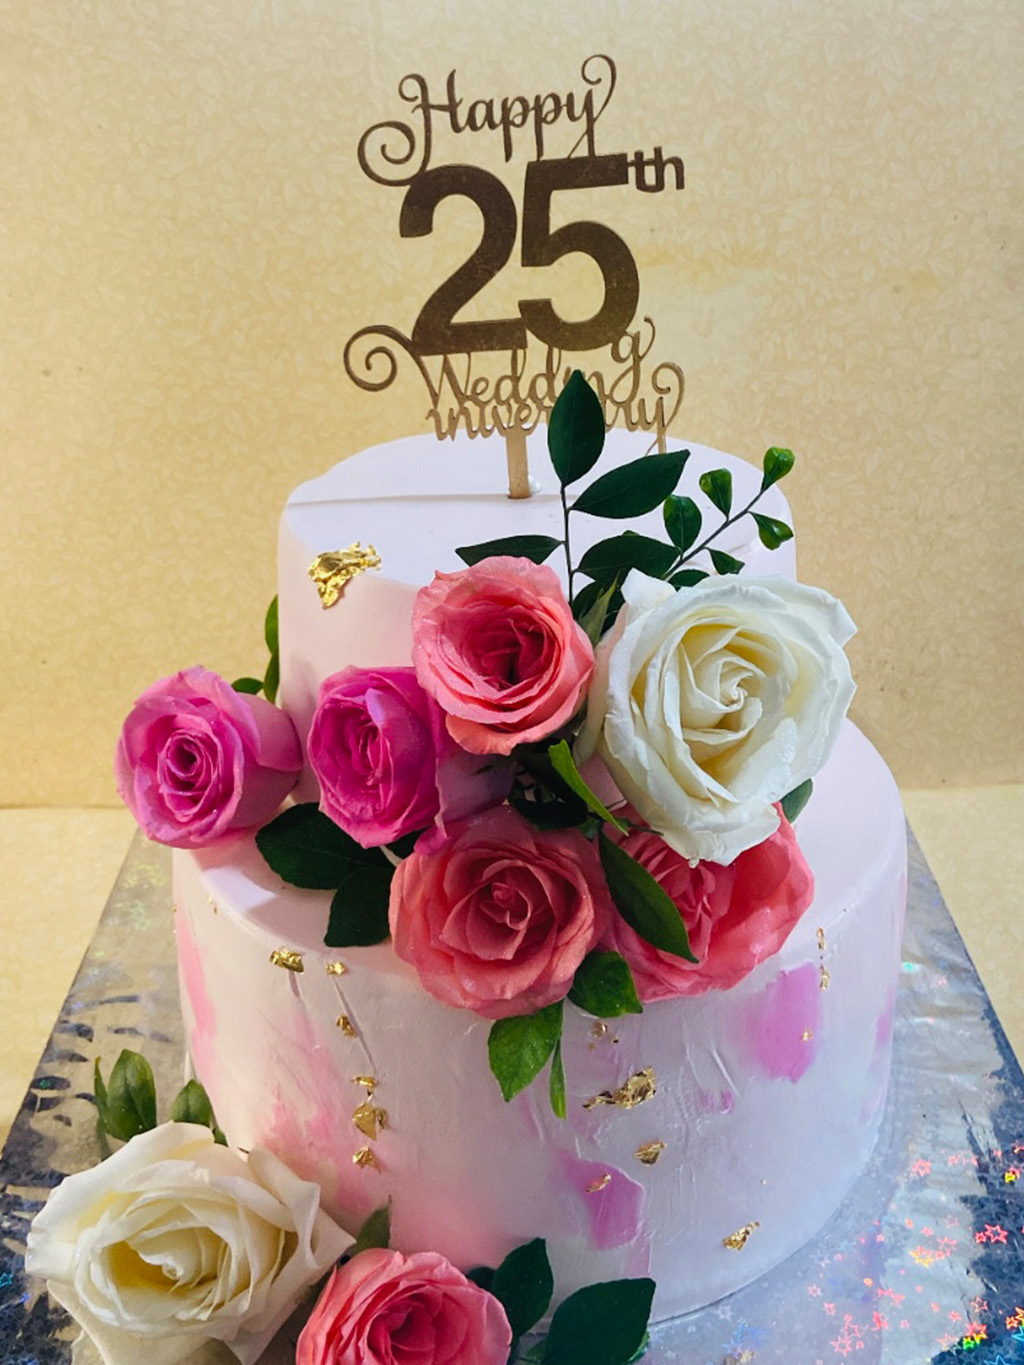 Special 1st Anniversary Cake | Gift Special 1st Anniversary Cake Online